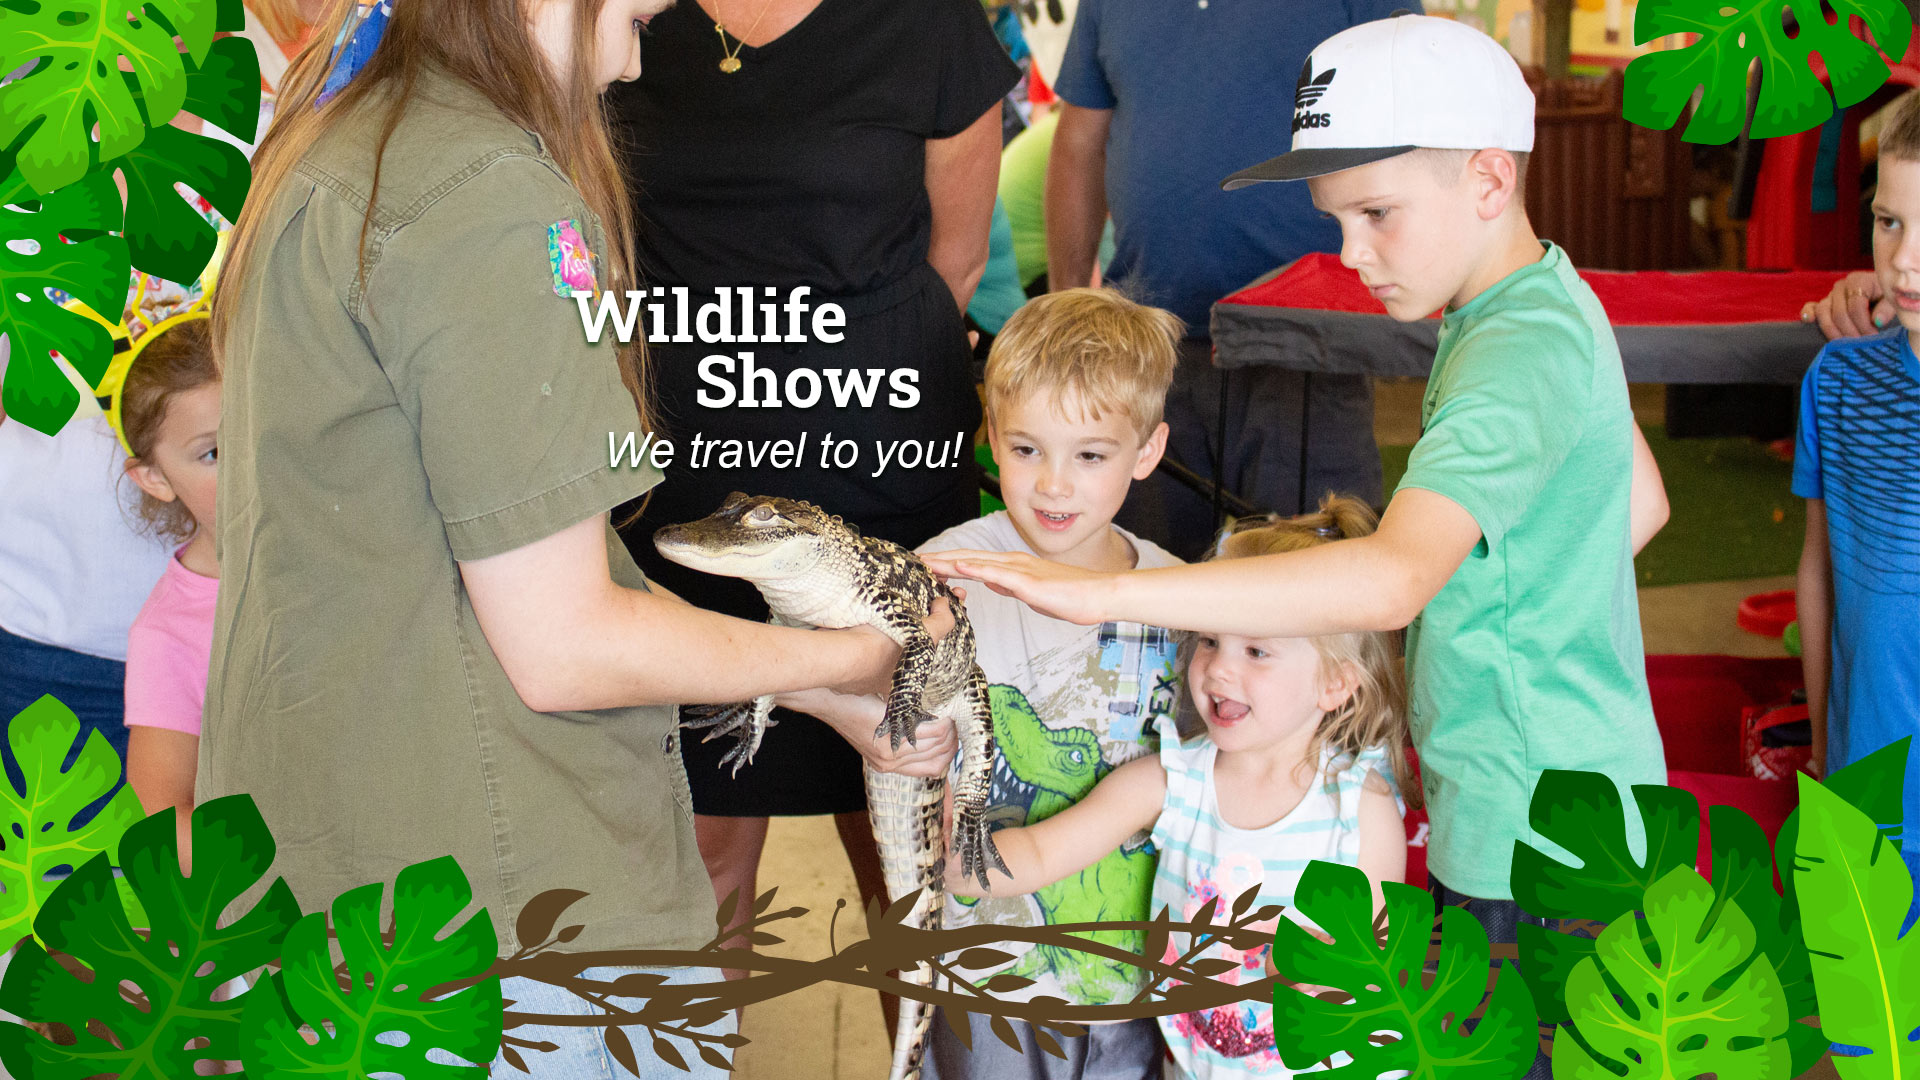 Wildlife Shows at Sustainable Safari We Travel to You! Children petting an alligator with assistance